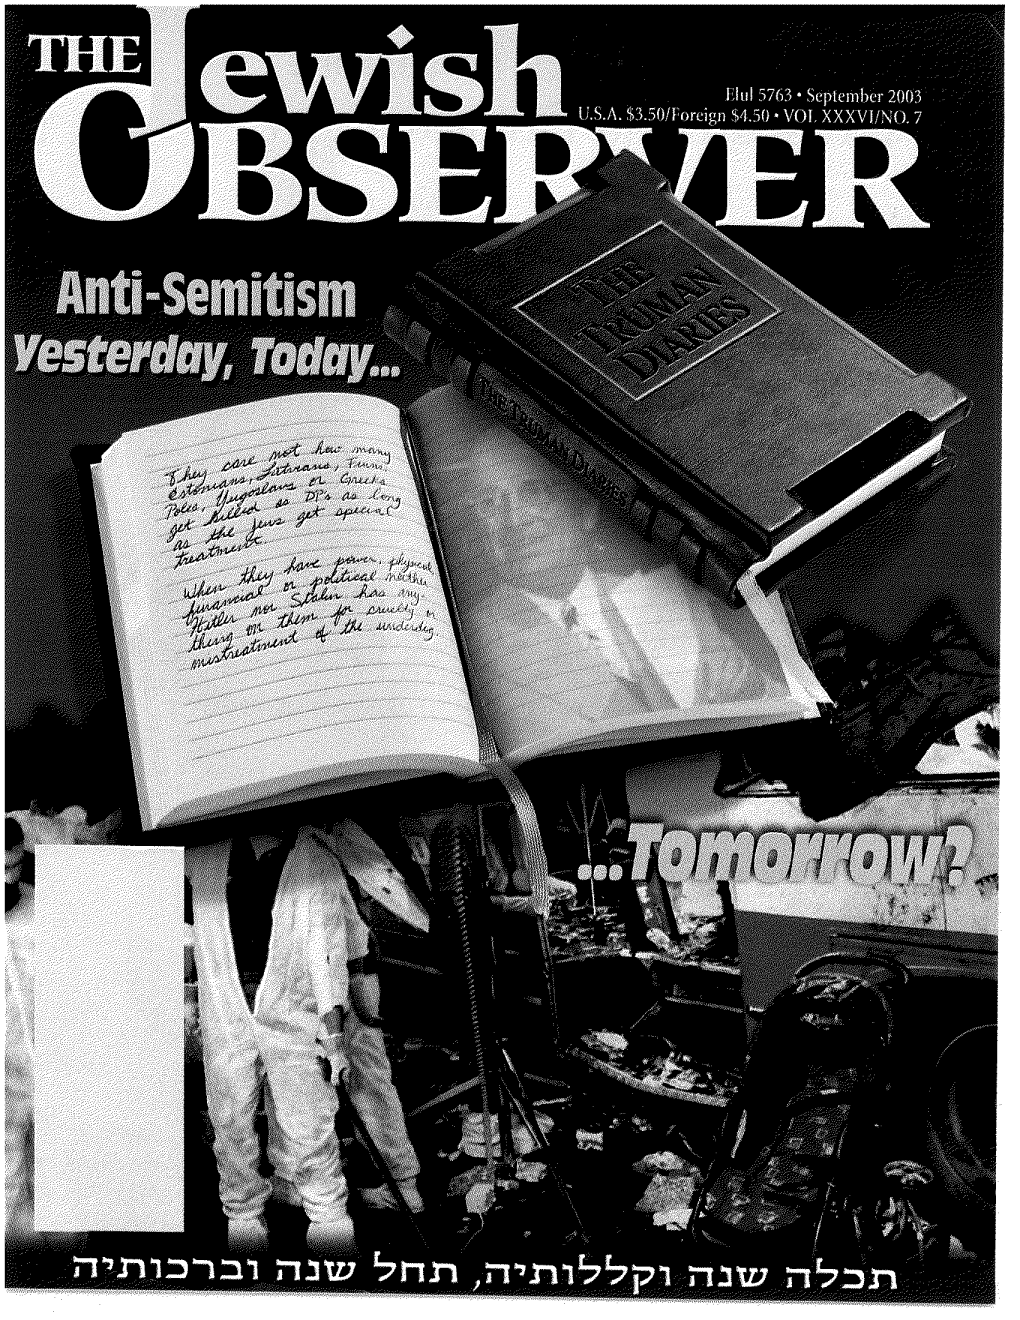 THE JEWISH OBSERVER (ISSN) 0021-6615 Is Published Monthly Except July and August by the Agudath Israel of America, 42 Broadway, New York, NY10004